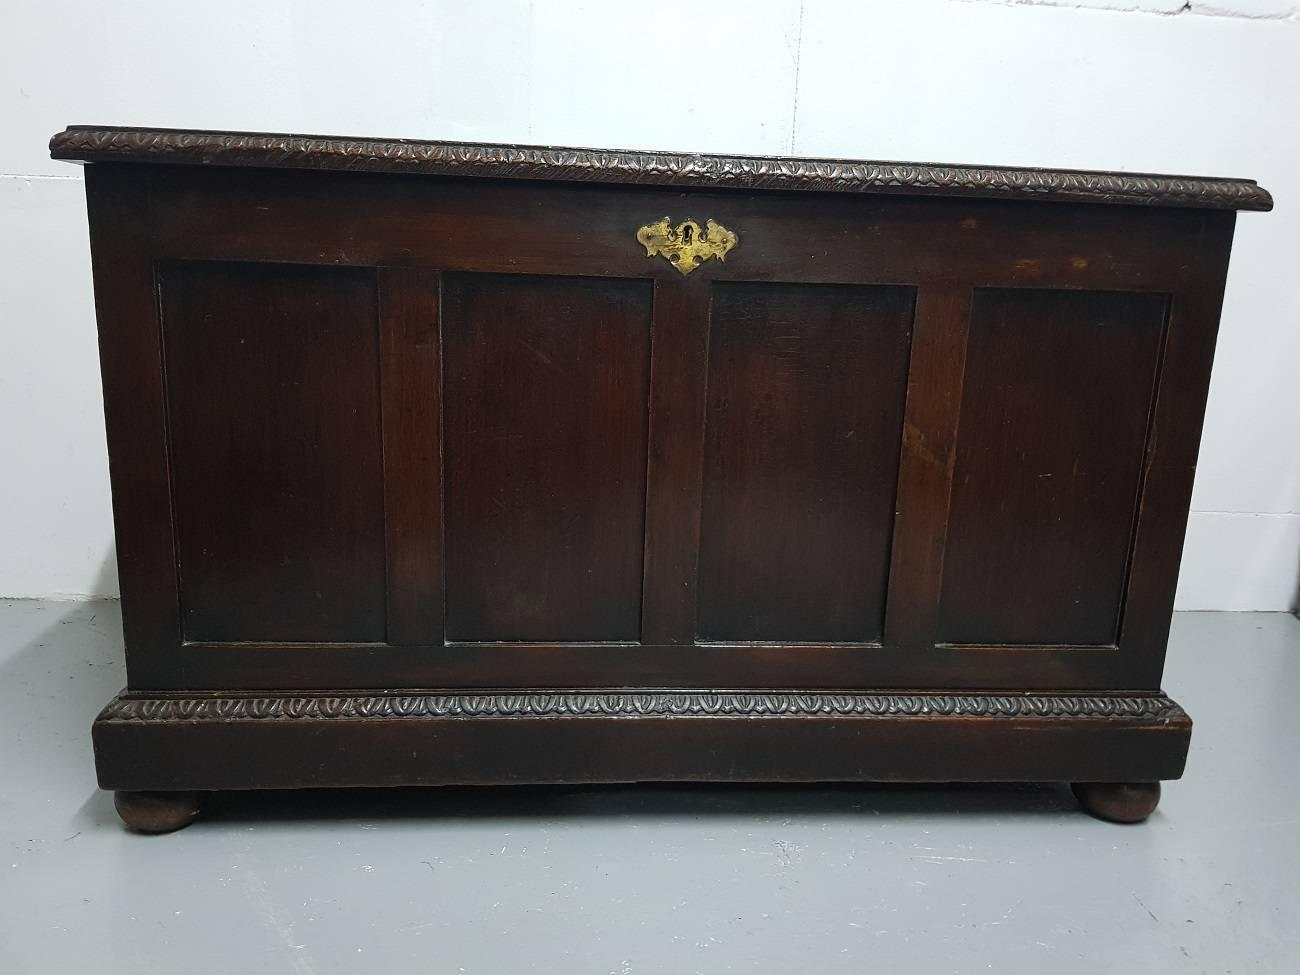 Antique late 19th century English mahogany blanket or pillow chest that can be put freestanding in a room because all sides are finished.

The measurements are:
Depth 50.5 cm/ 19.8 inch.
Width 90.5 cm/ 35.6 inch.
Height 55.5 cm/ 21.8 inch.
 